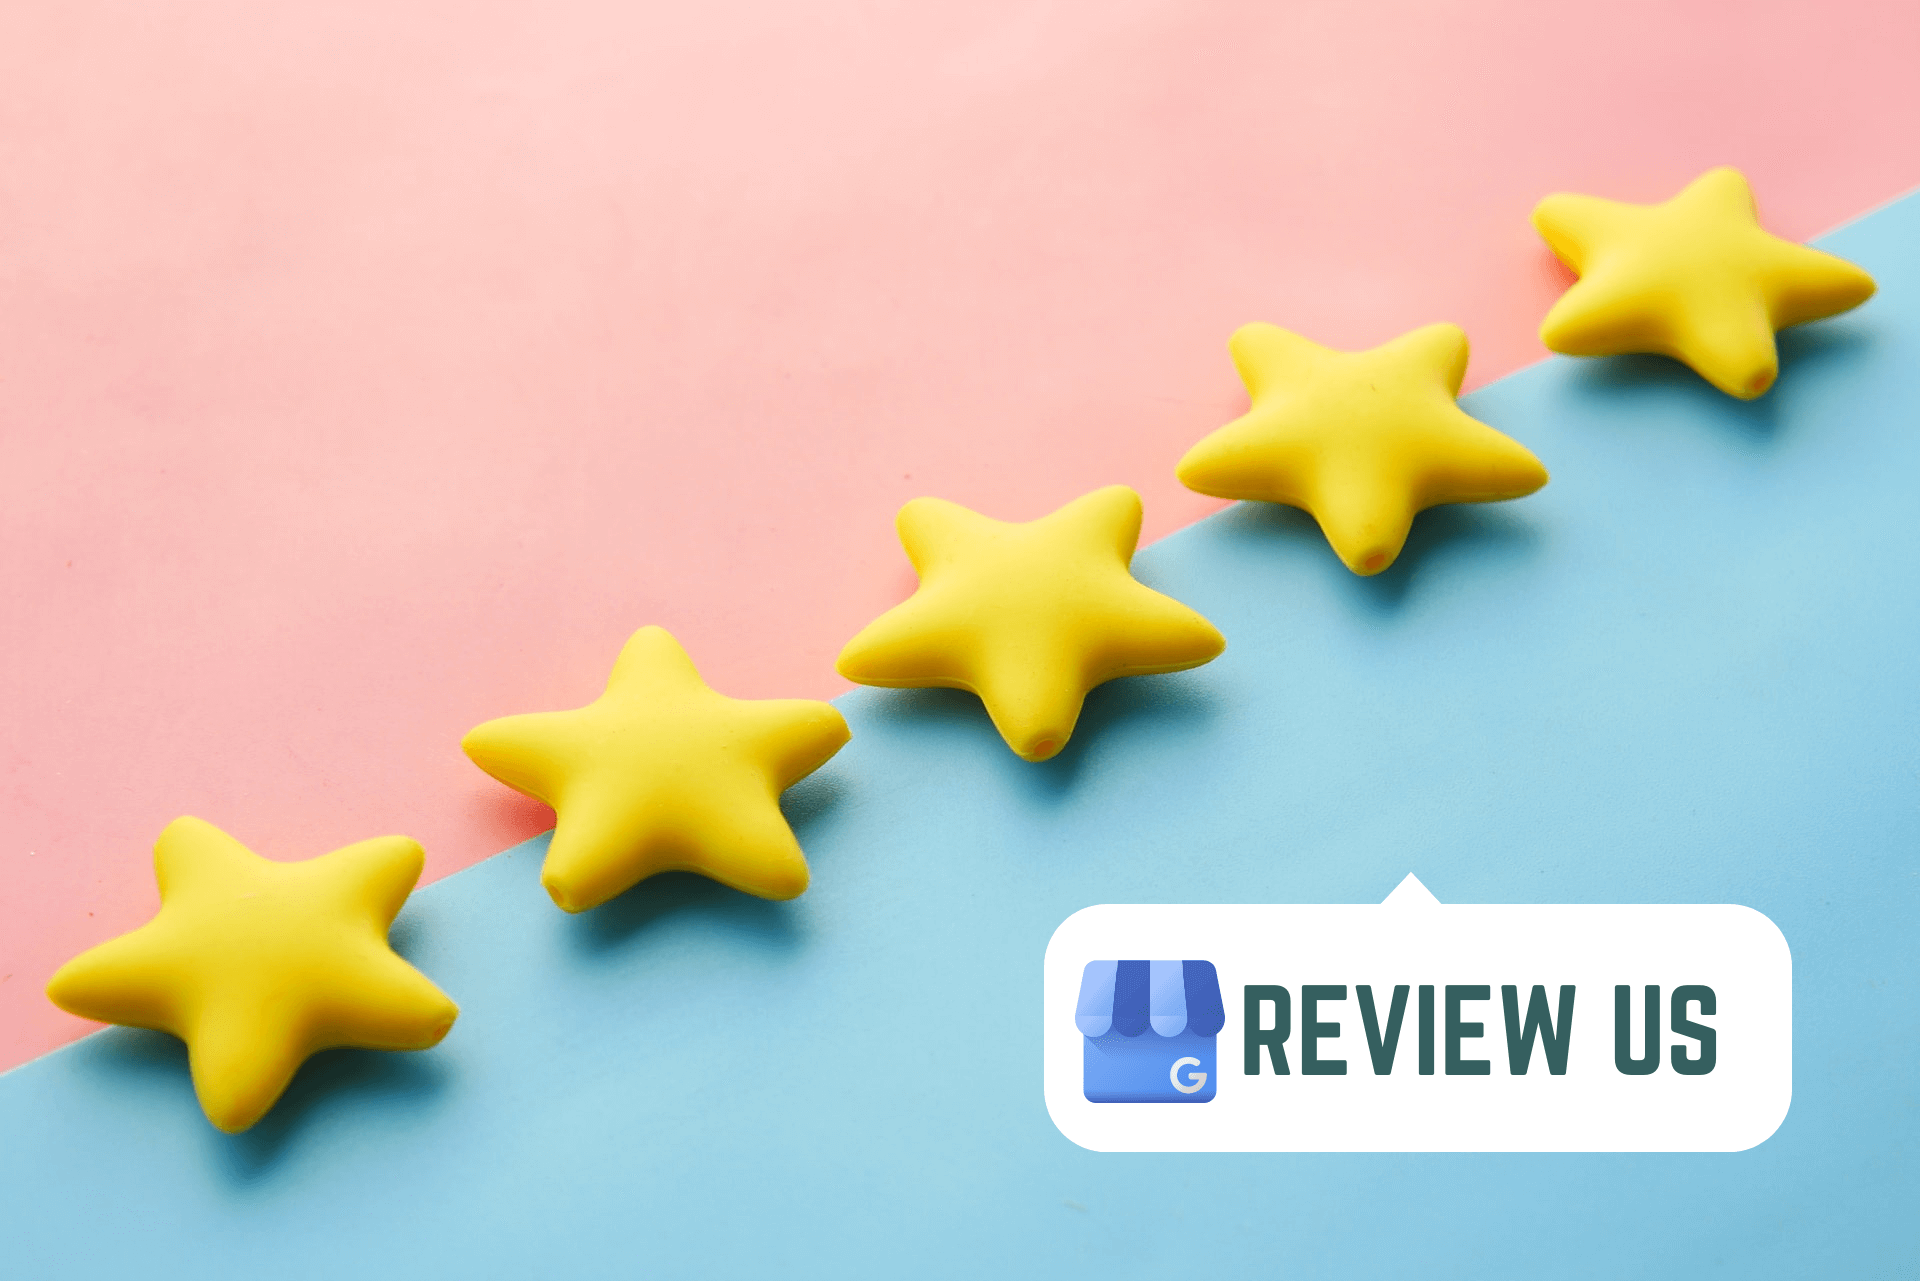 Image of 5 yellow stars with a sign review us.